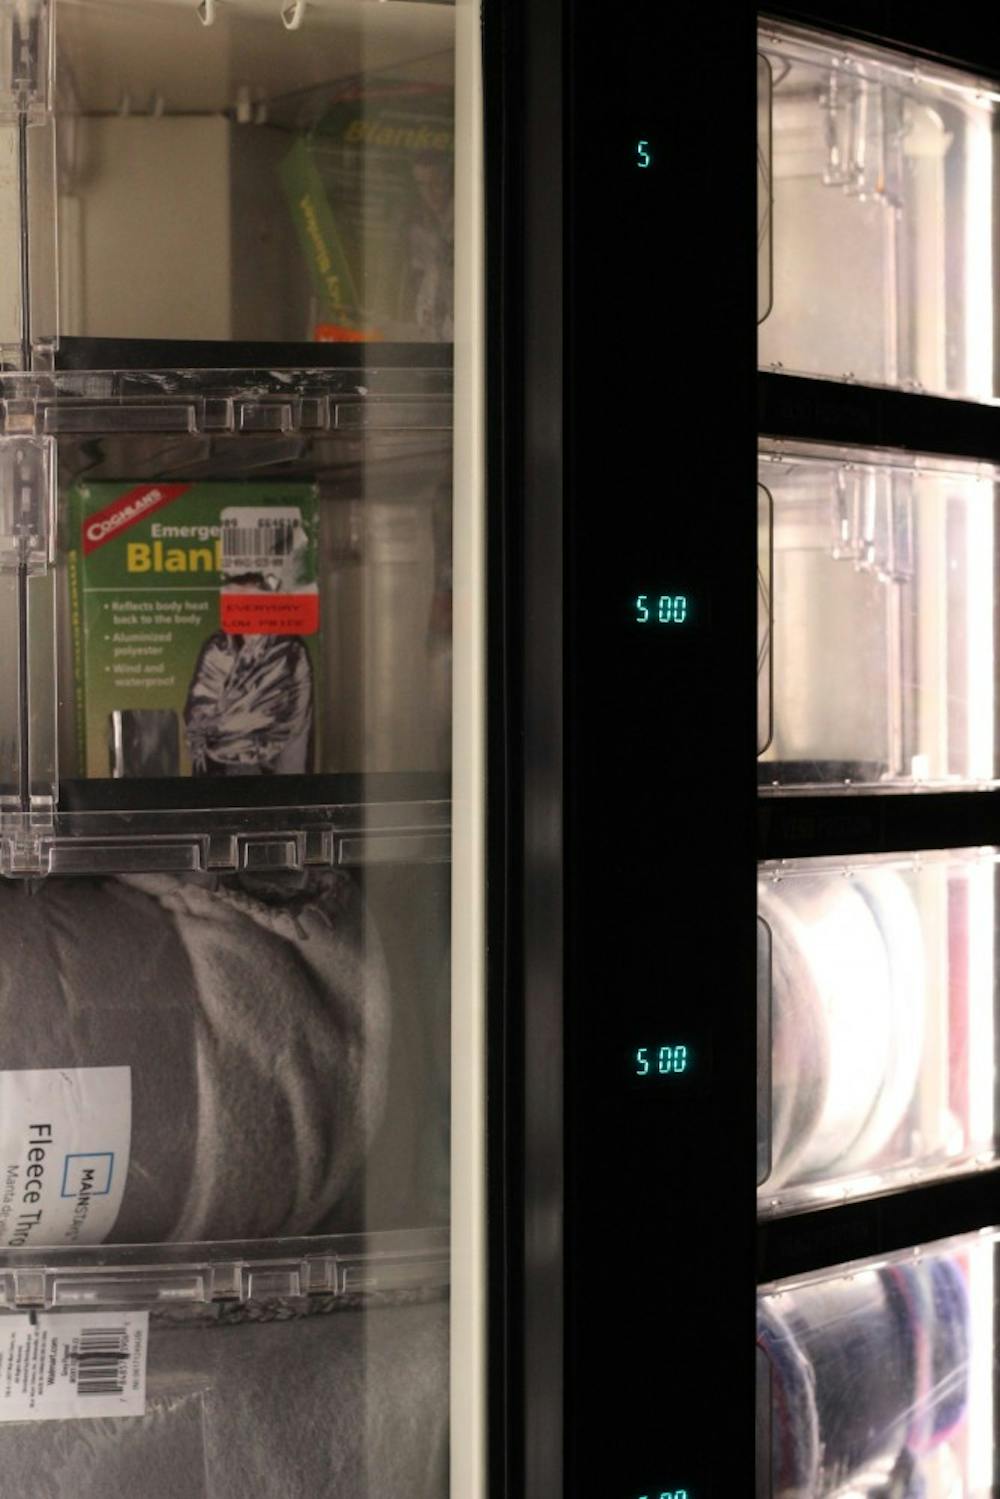 Associated Press: Morning-after pill vending machines gain popularity on college campuses post-Roe